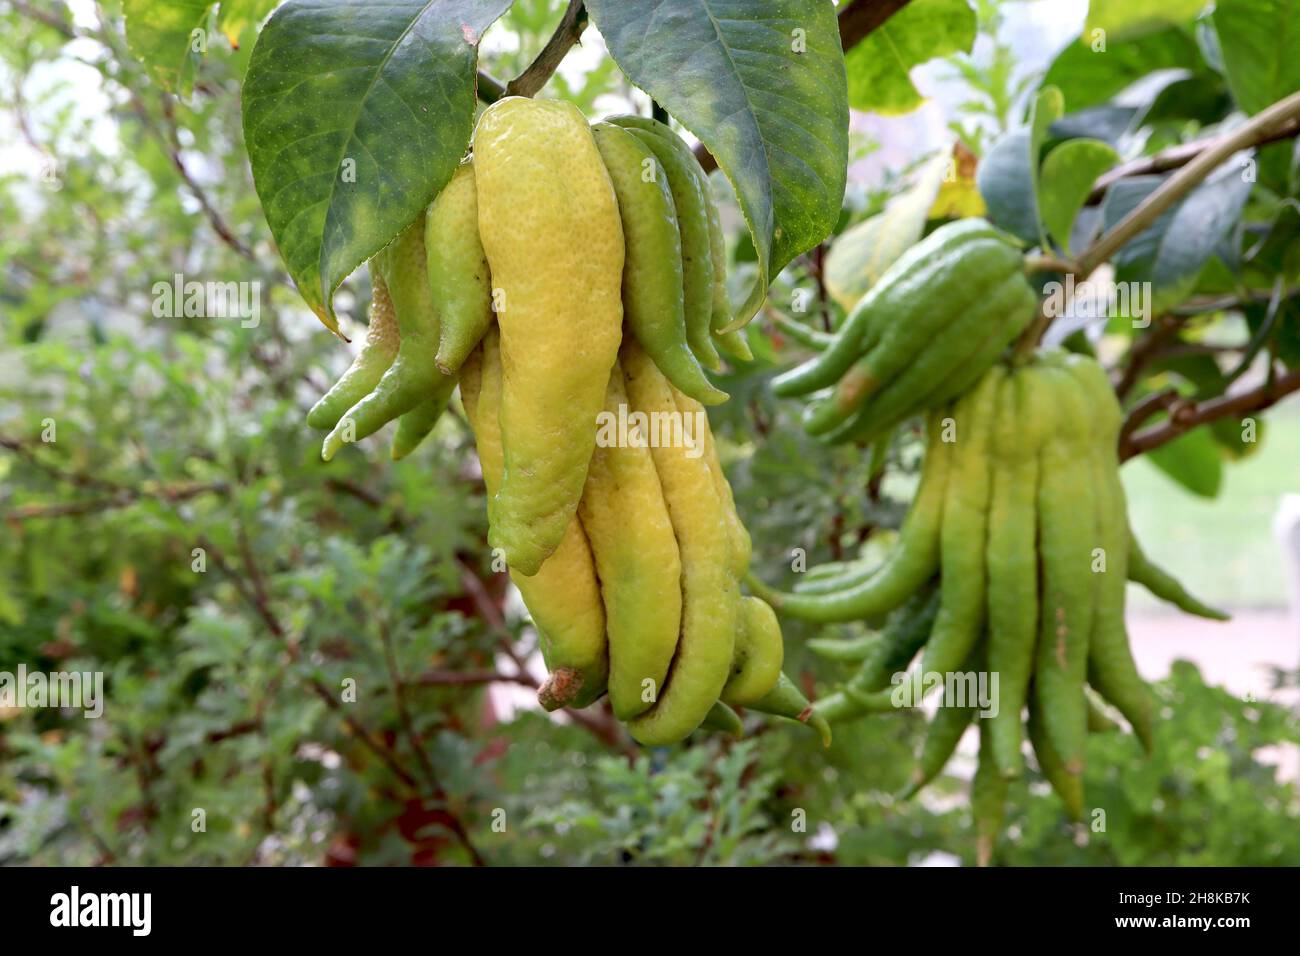 Citrus medica var. sarcodactylus Buddha’s hand – clusters of long finger-like yellow and mid green fruit, thick green leaves, November, England, UK Stock Photo